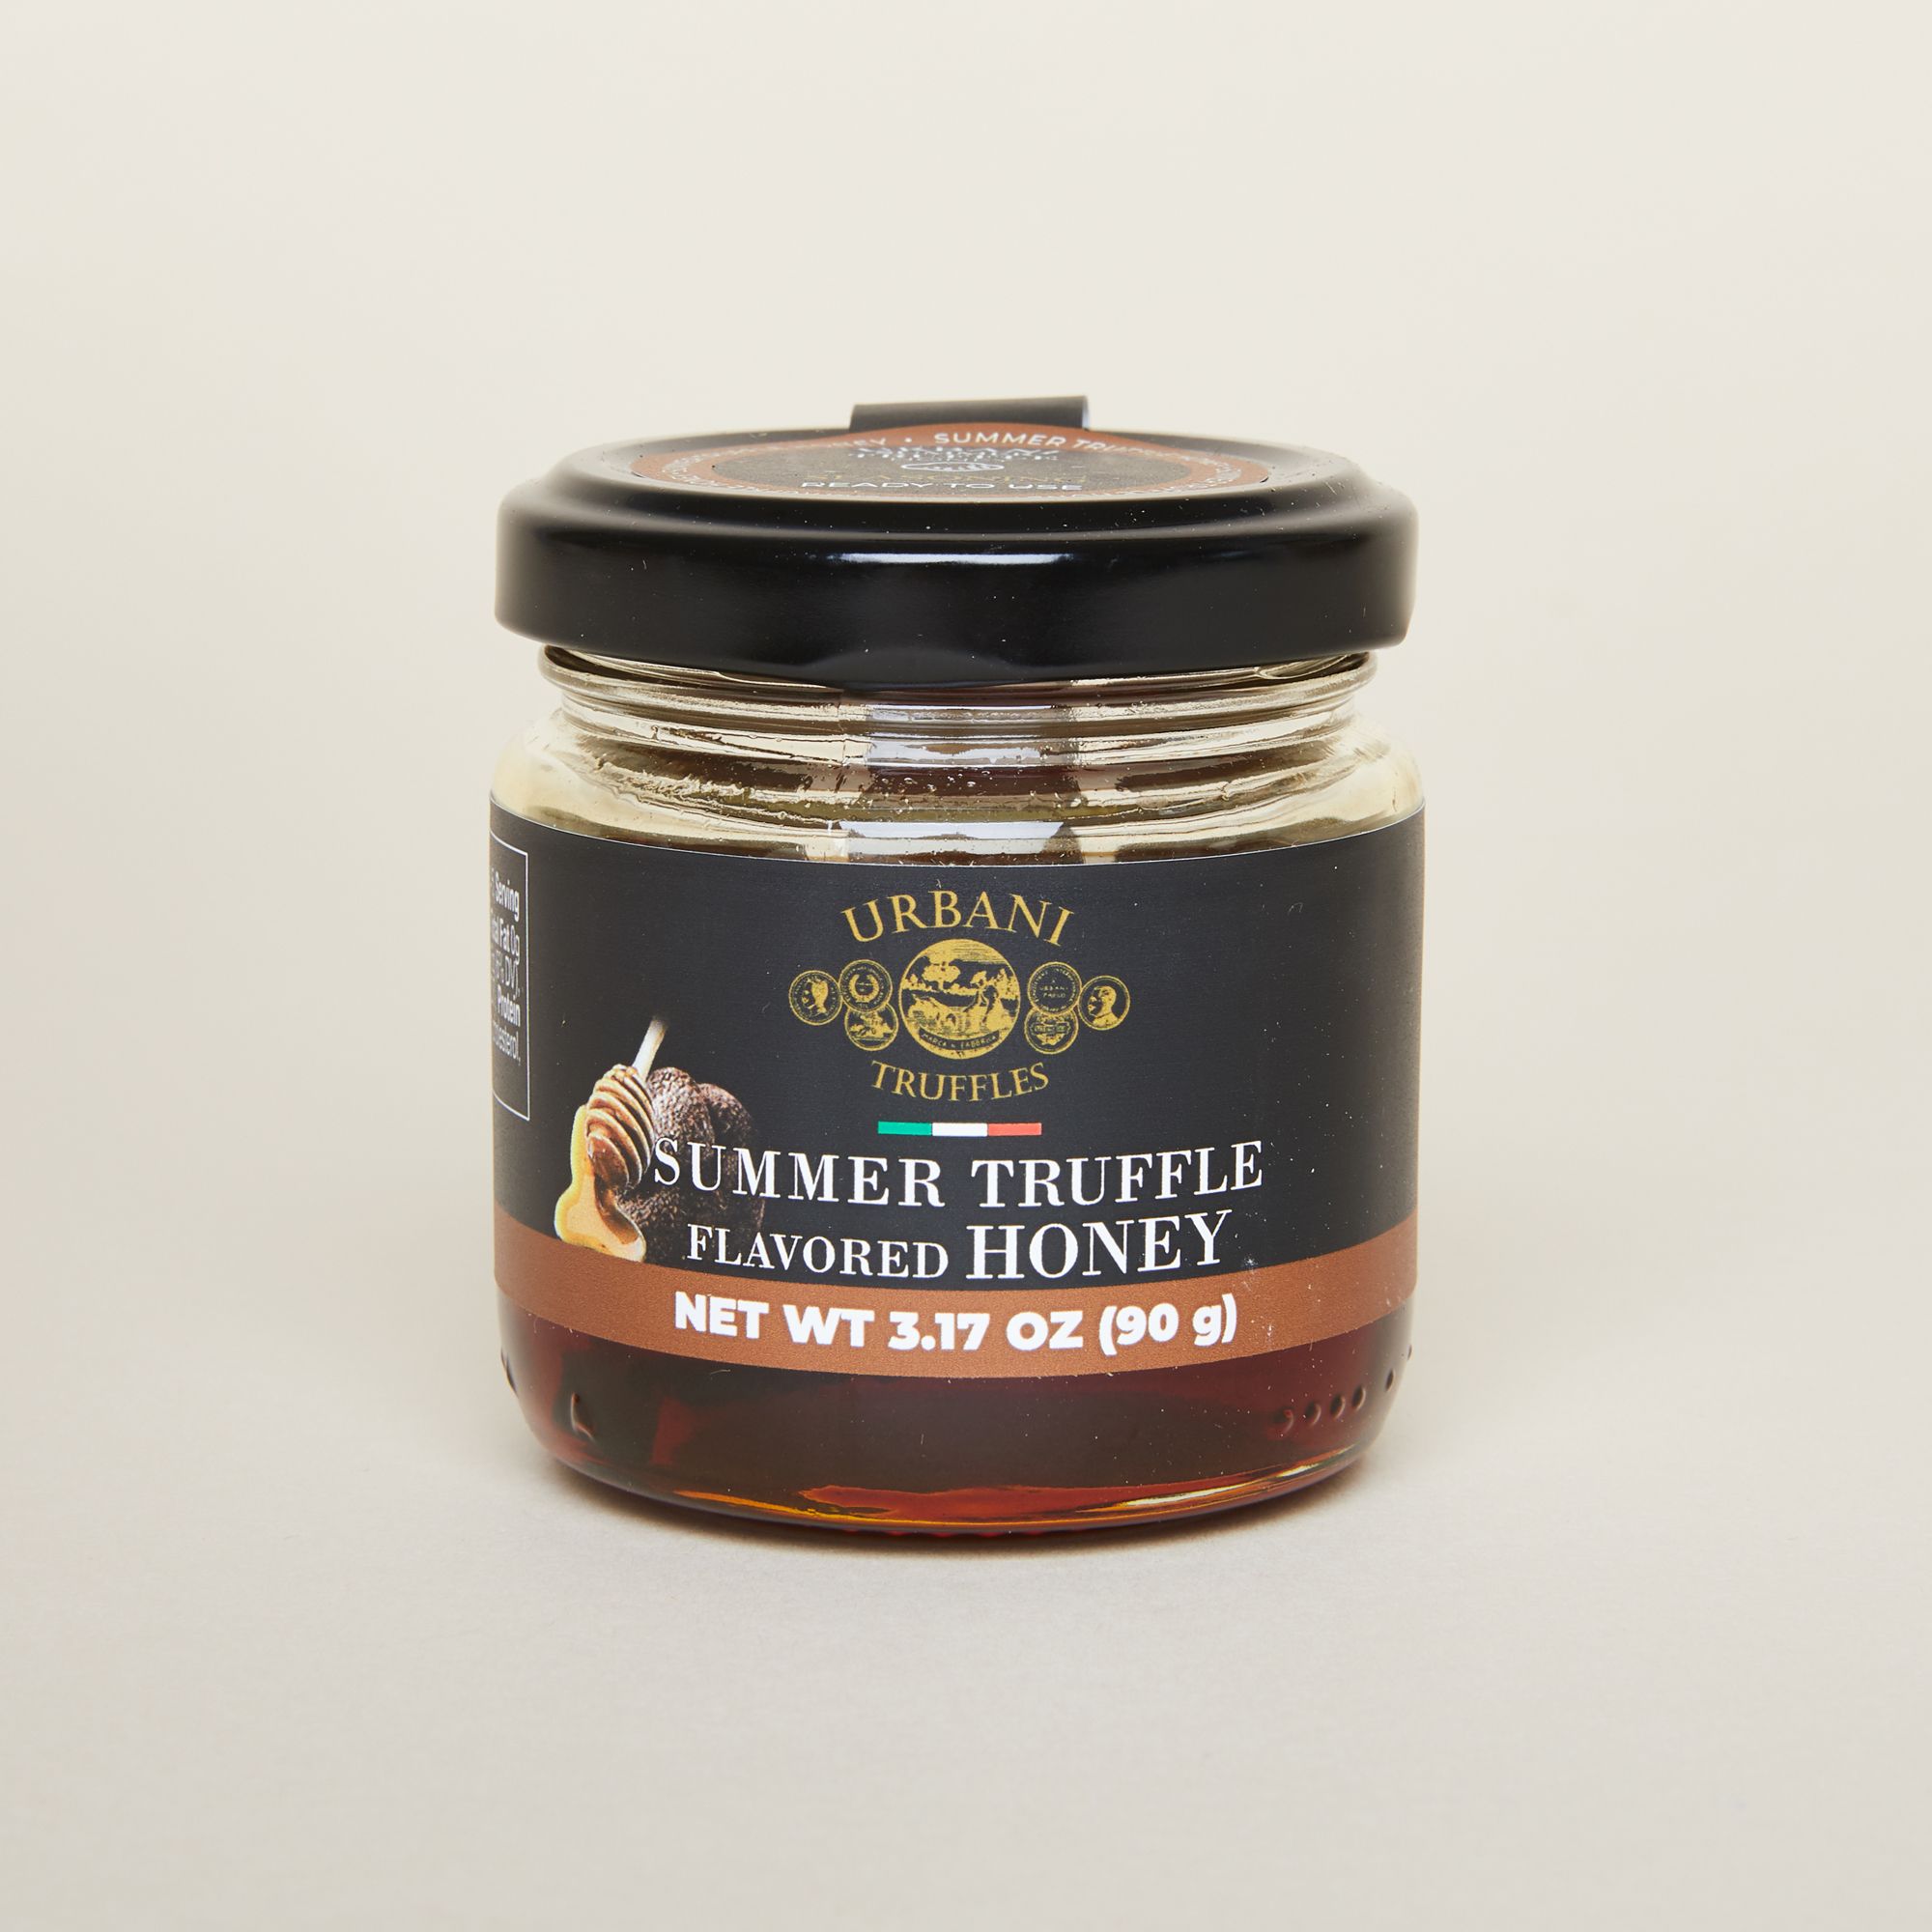 A stout glass container with a black lid and black label that reads Urbani Black Truffle Chestnut Honey